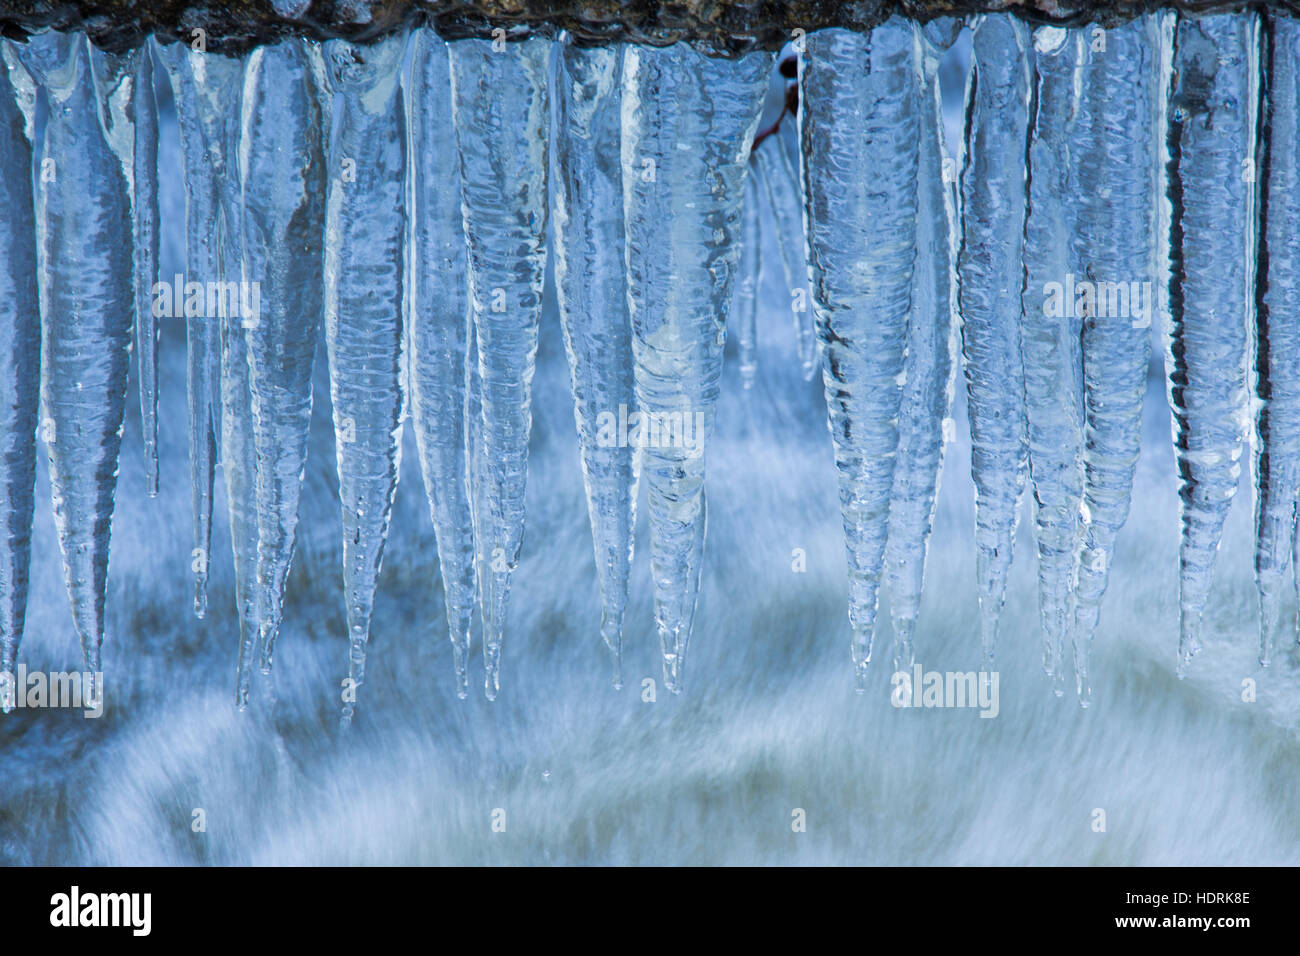 Frozen waterfall with blue ice in winter Stock Photo